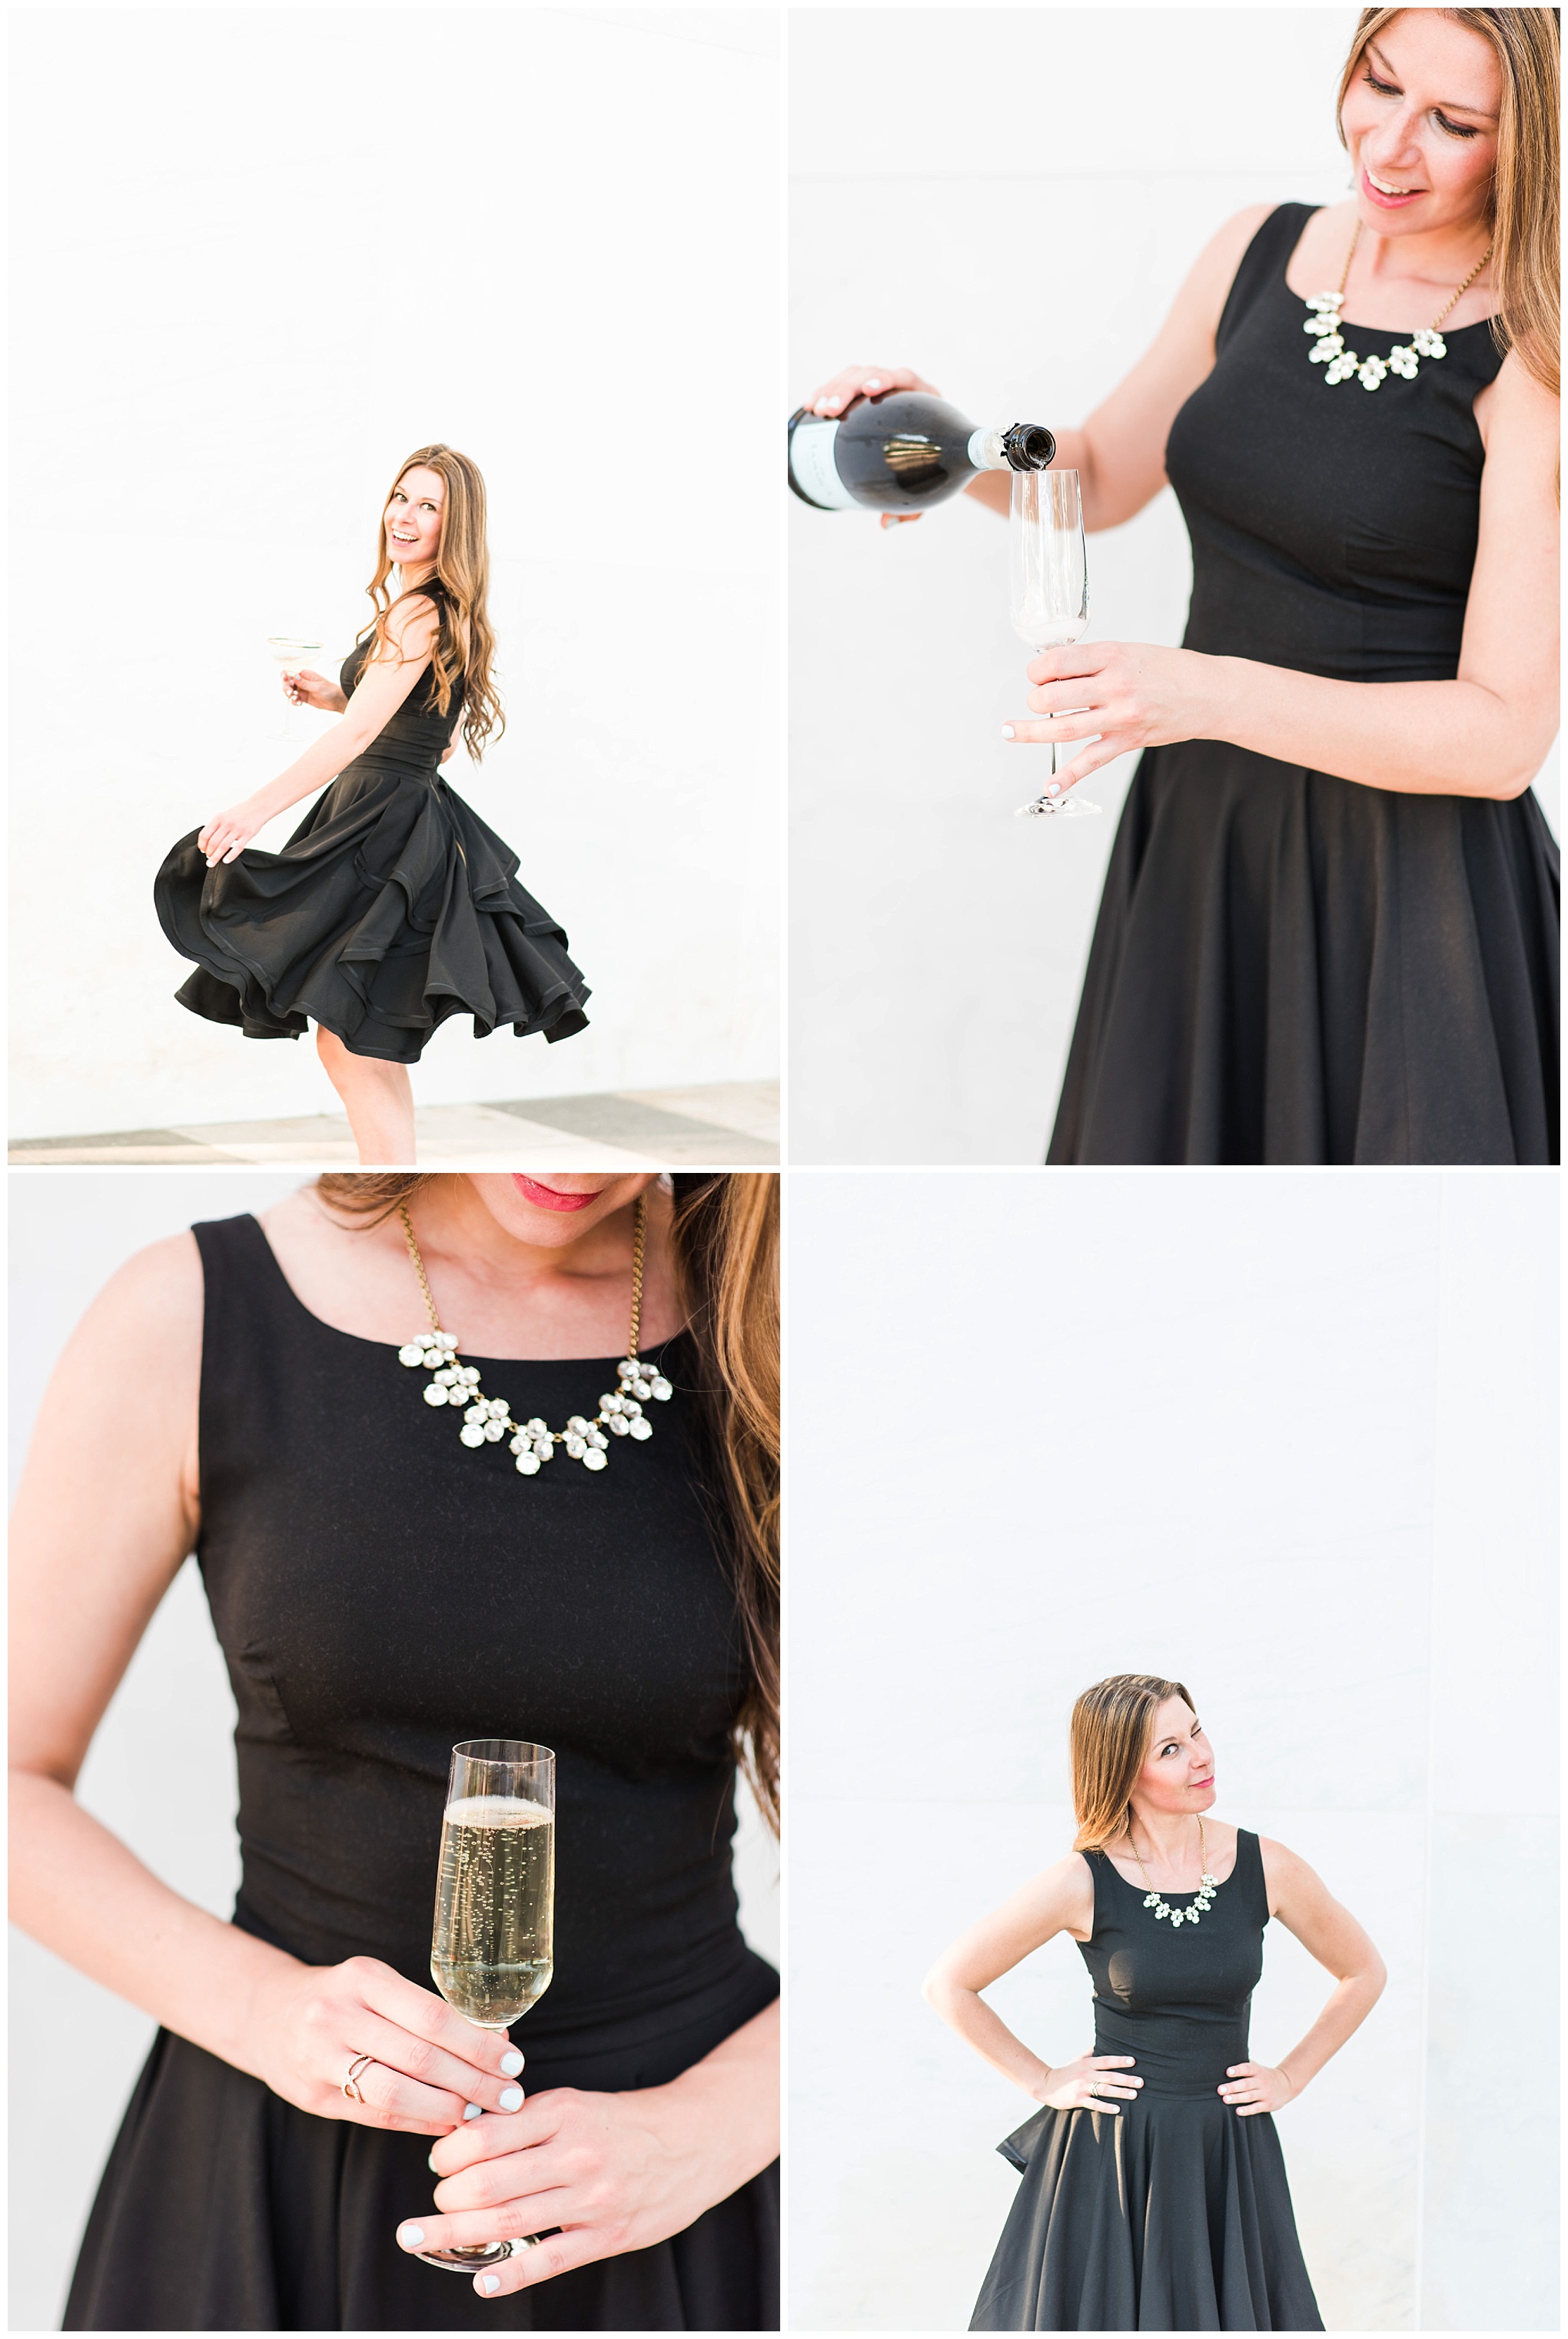 photography website launch, website launch, D.C. photographer, D.C. wedding photographer, D.C., headshots, branding session, J. Crew, The Kennedy Center, black dress, Rent The Runway, La Marca prosecco, prosecco, champagne flute, J.Crew, statement necklace